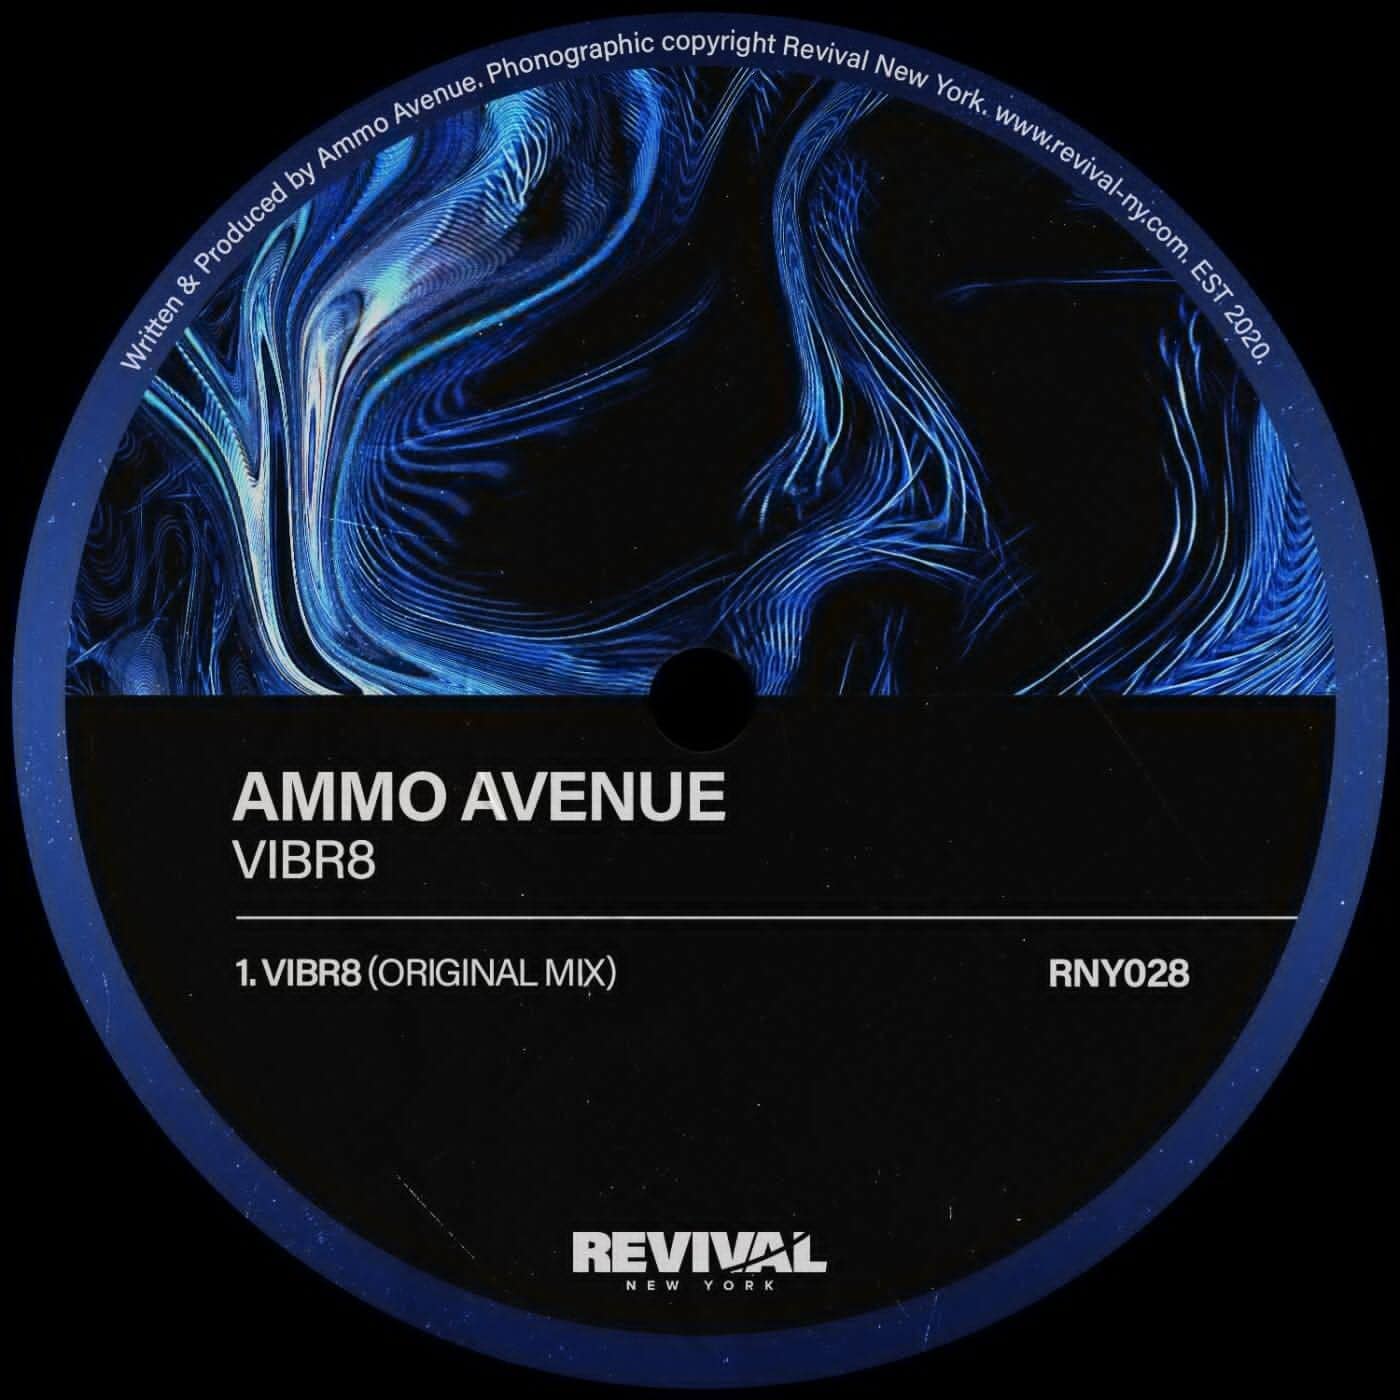 Download Ammo Avenue - VIBR8 on Electrobuzz